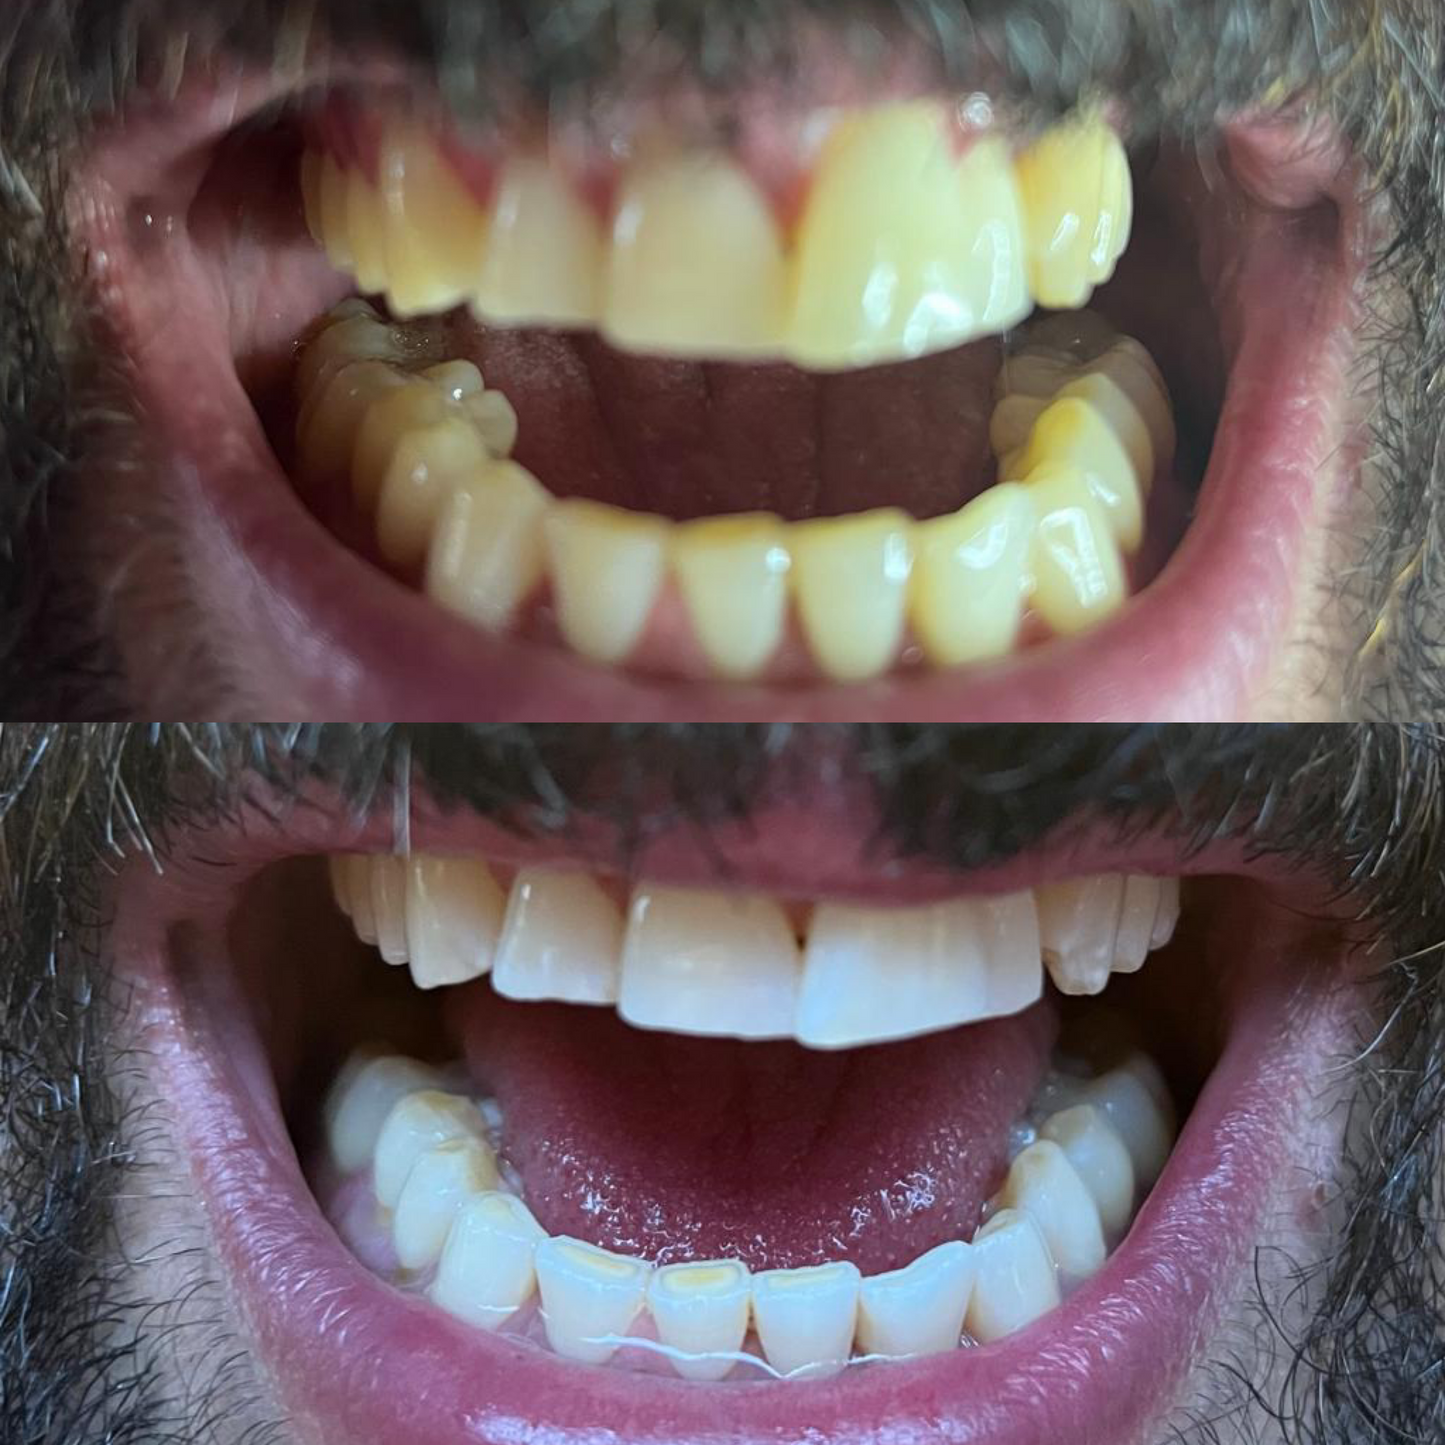 before and after natural teeth whitening